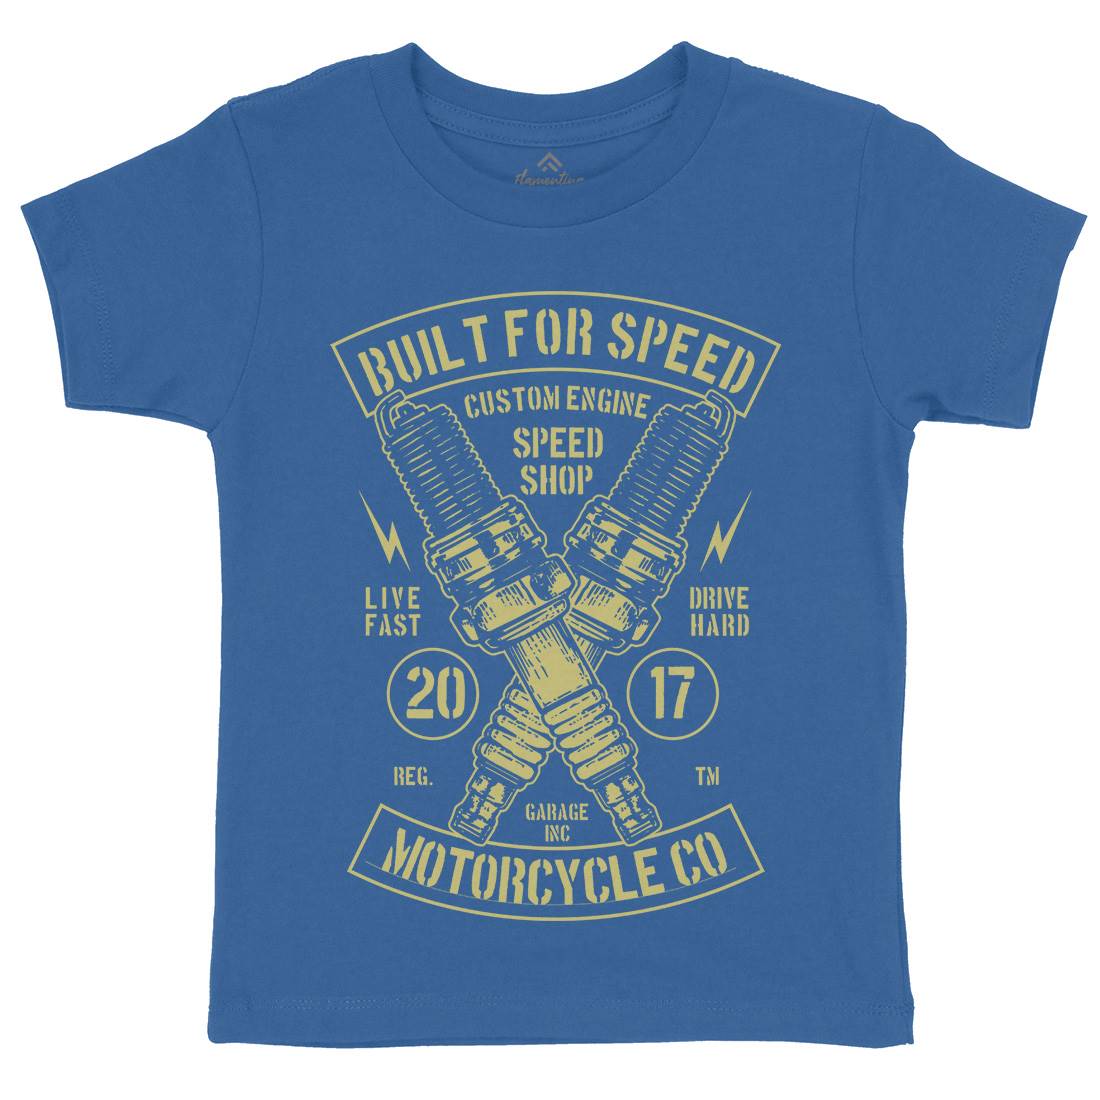 Built For Speed Kids Crew Neck T-Shirt Motorcycles B188